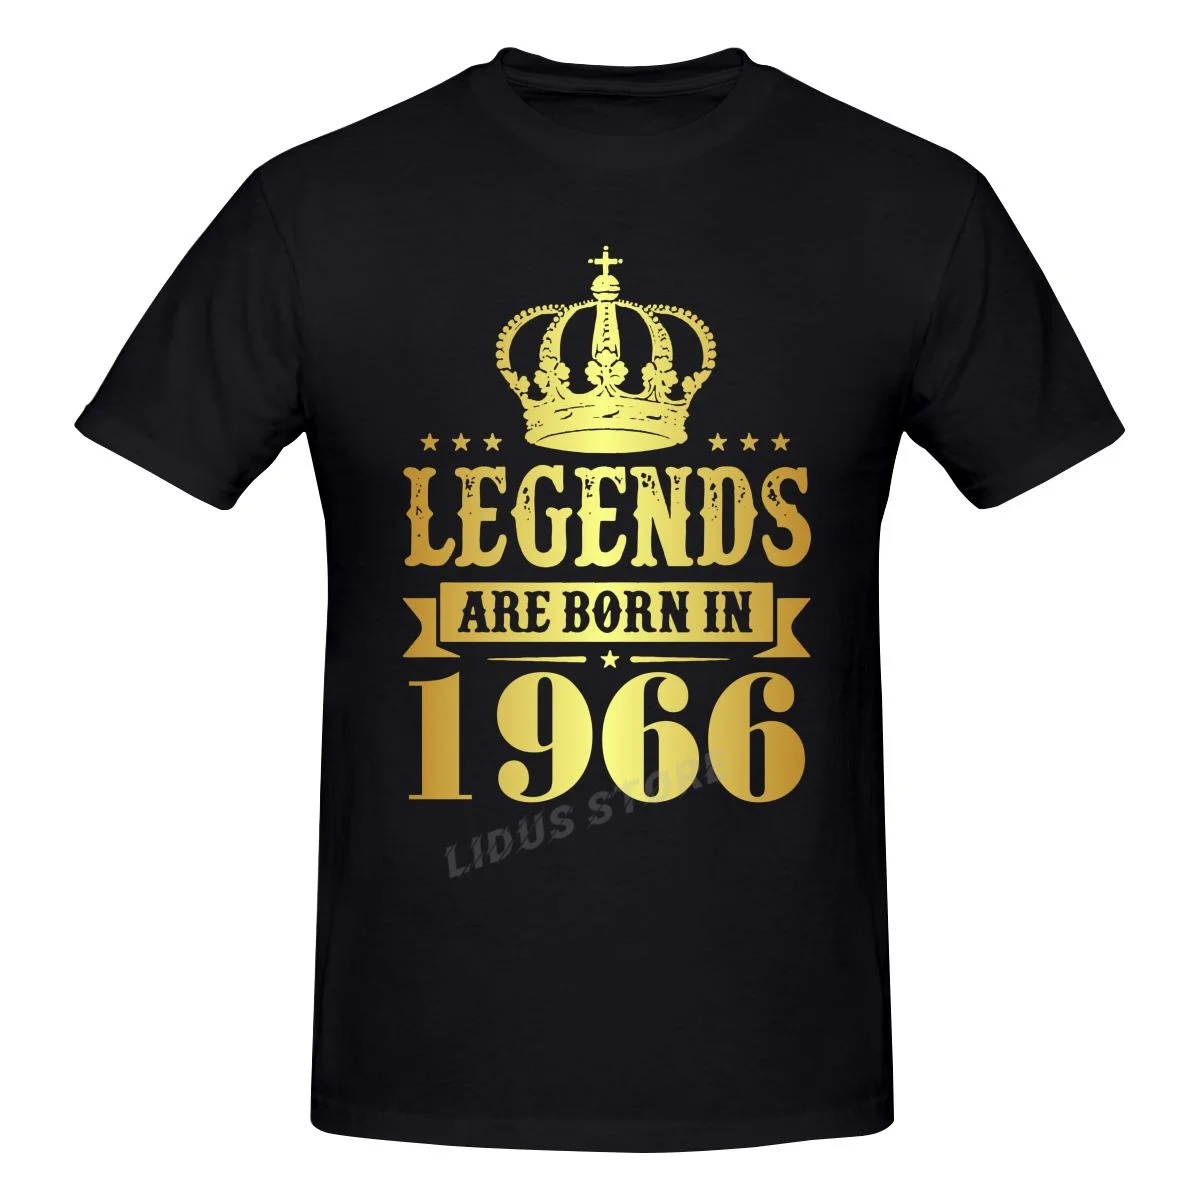 

Legends Are Born In 1966 56 Years For 56th Birthday Gift T shirts Harajuku Short Sleeve T-shirt Graphics Tshirt Brands Tee Tops